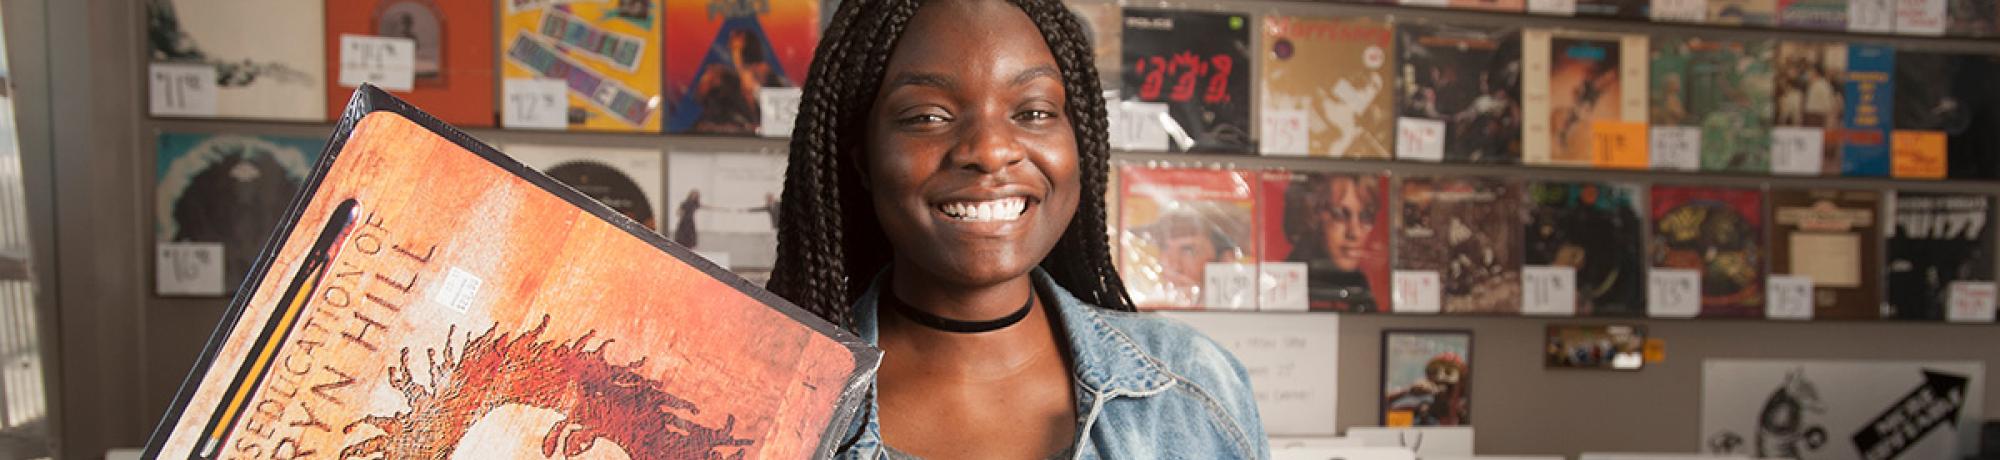 Taking a gap year after graduation can help decide your future. McNair scholar and Fulbright award winner Amanda Eke ’17, with bachelor’s degree in gender, sexuality and women's studies, is spending this year using hip hop lyrics to teach English in Malta. (Gregory Urquiaga/UC Davis)